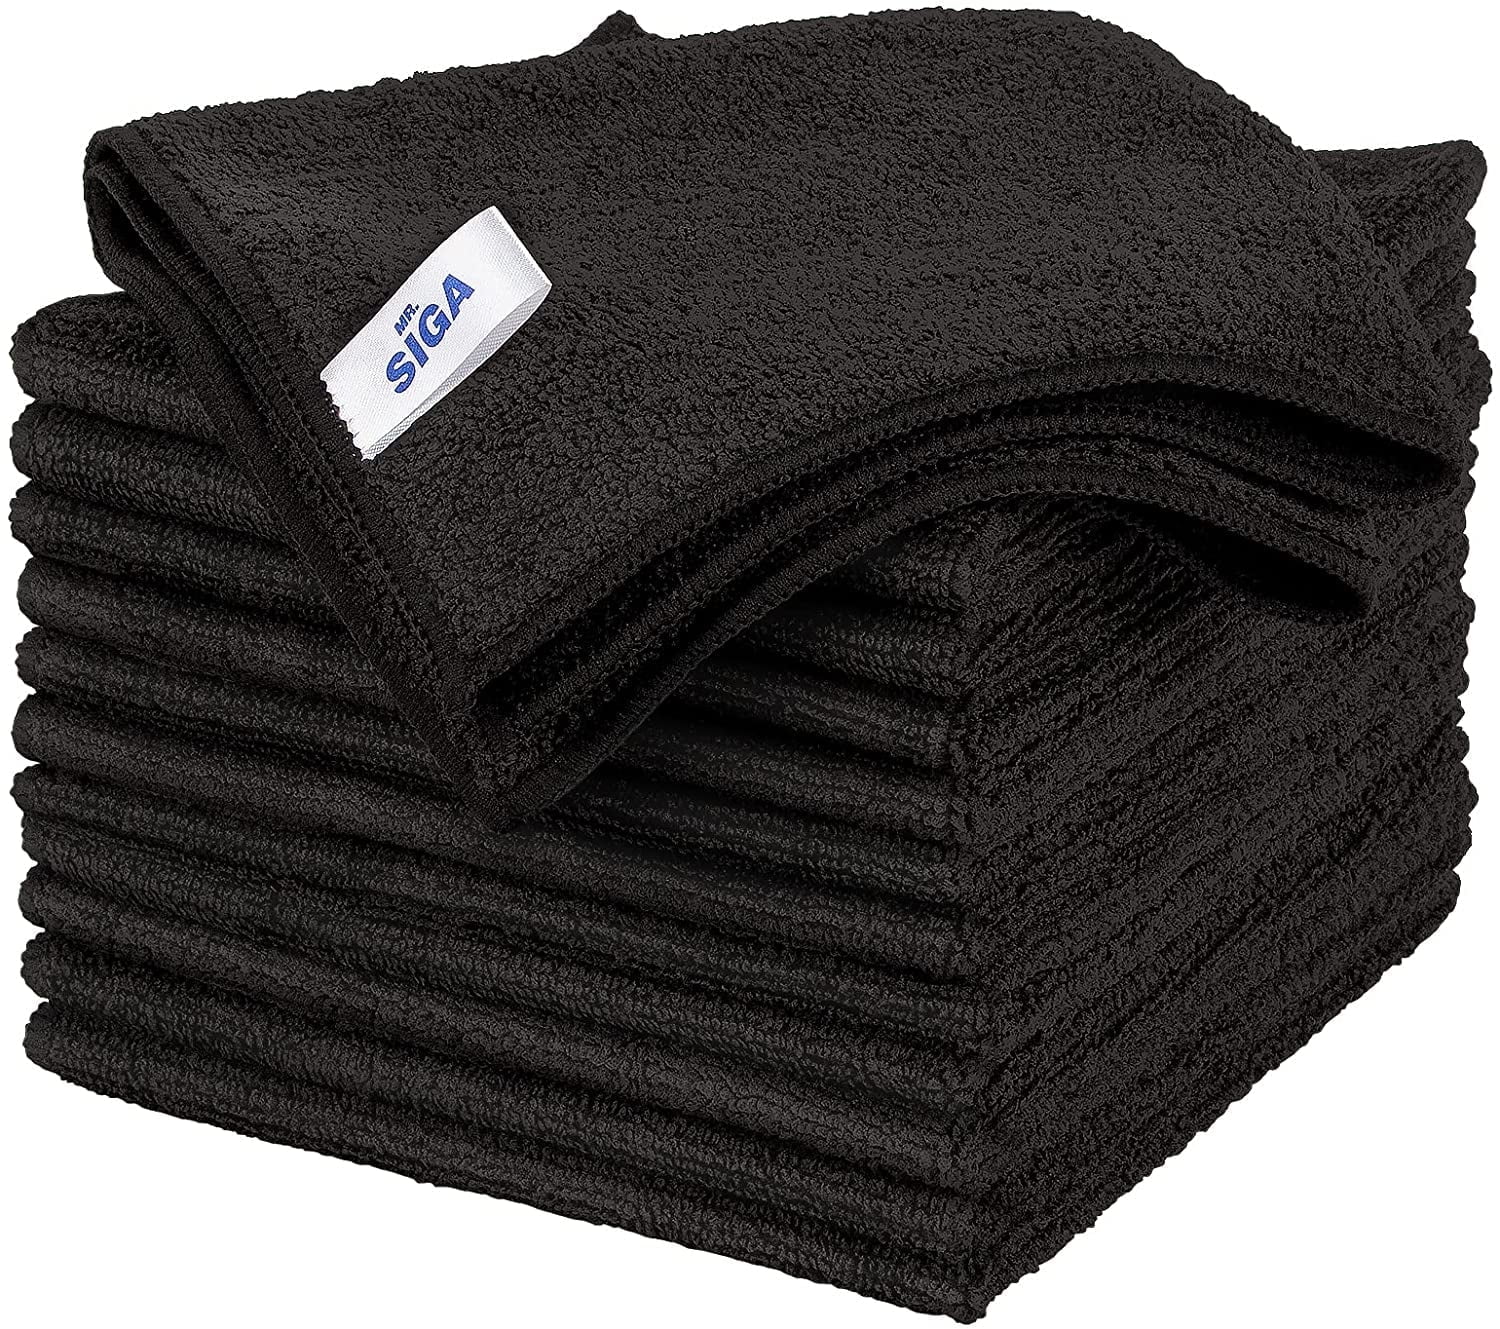 MR.SIGA Professional Premium Microfiber Towels for Household Cleaning, Dual-Sided Car Washing and Detailing, 15.7 x 23.6 inch, 6 Pack